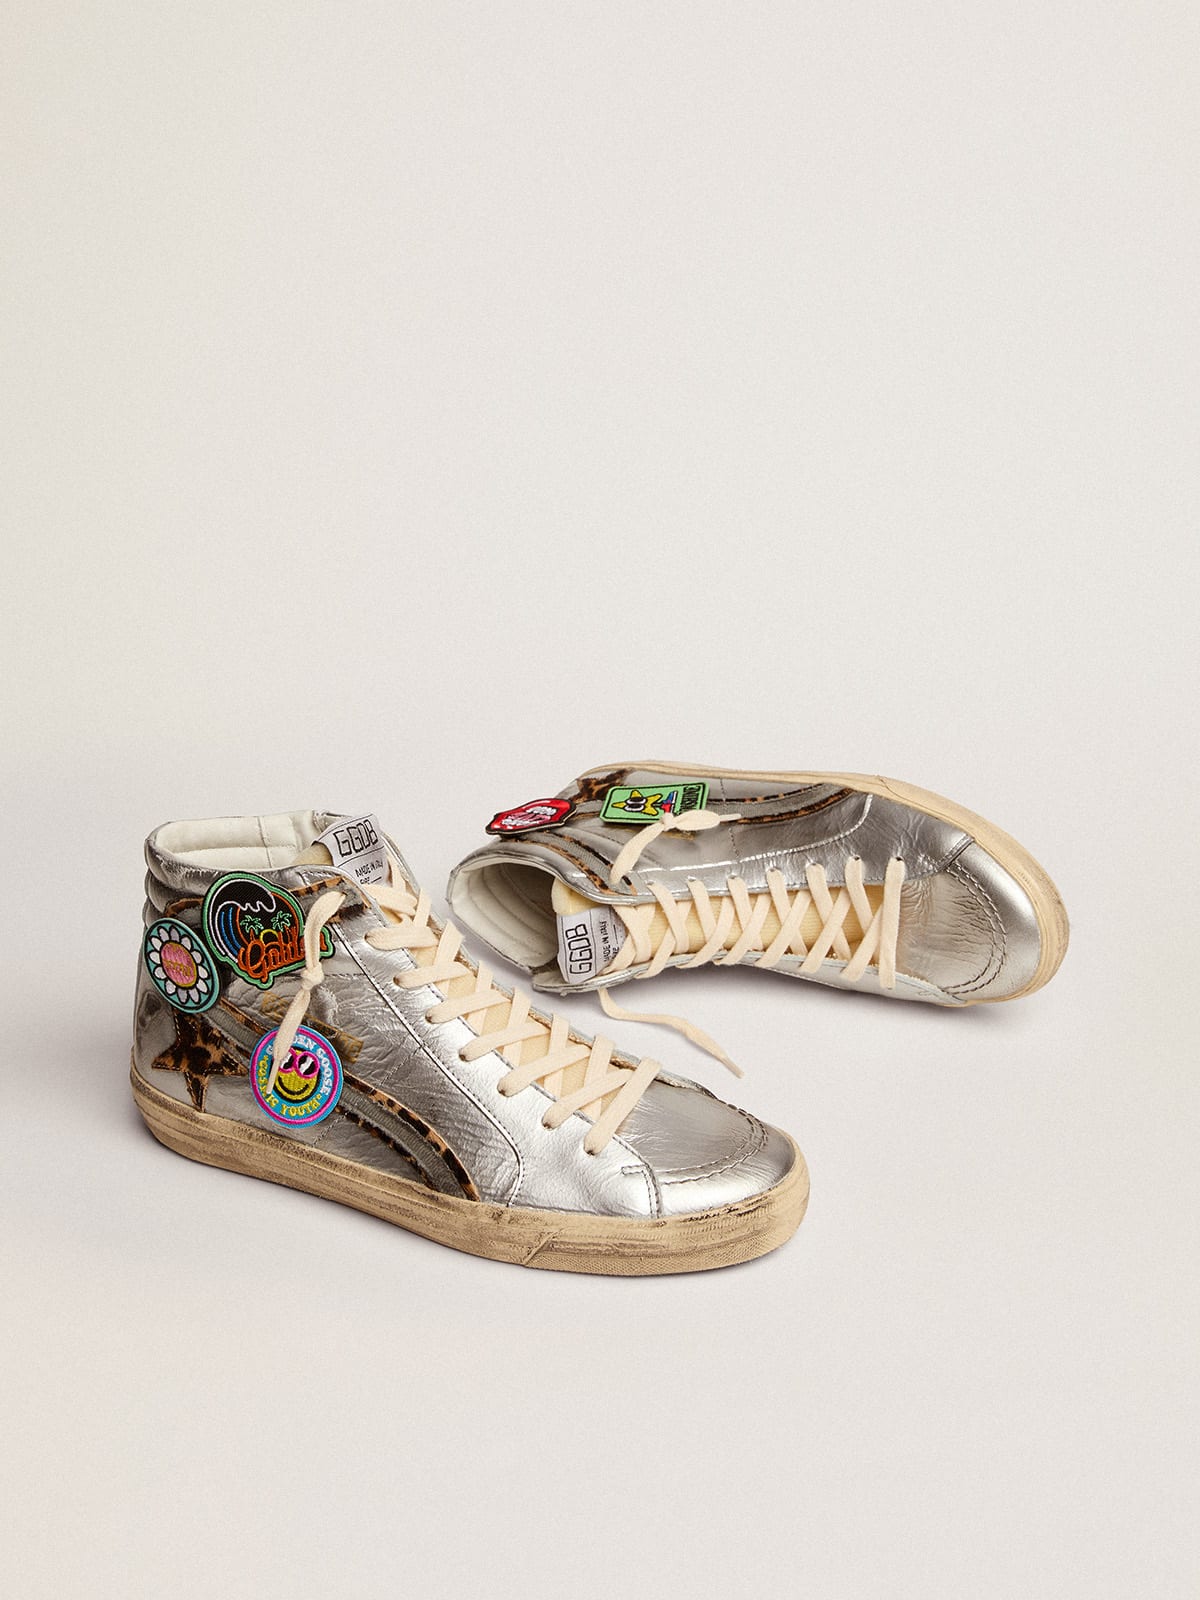 Golden Goose - Slide sneakers in silver laminated leather with leopard-print pony skin star and flash with detachable multicolored patches in 